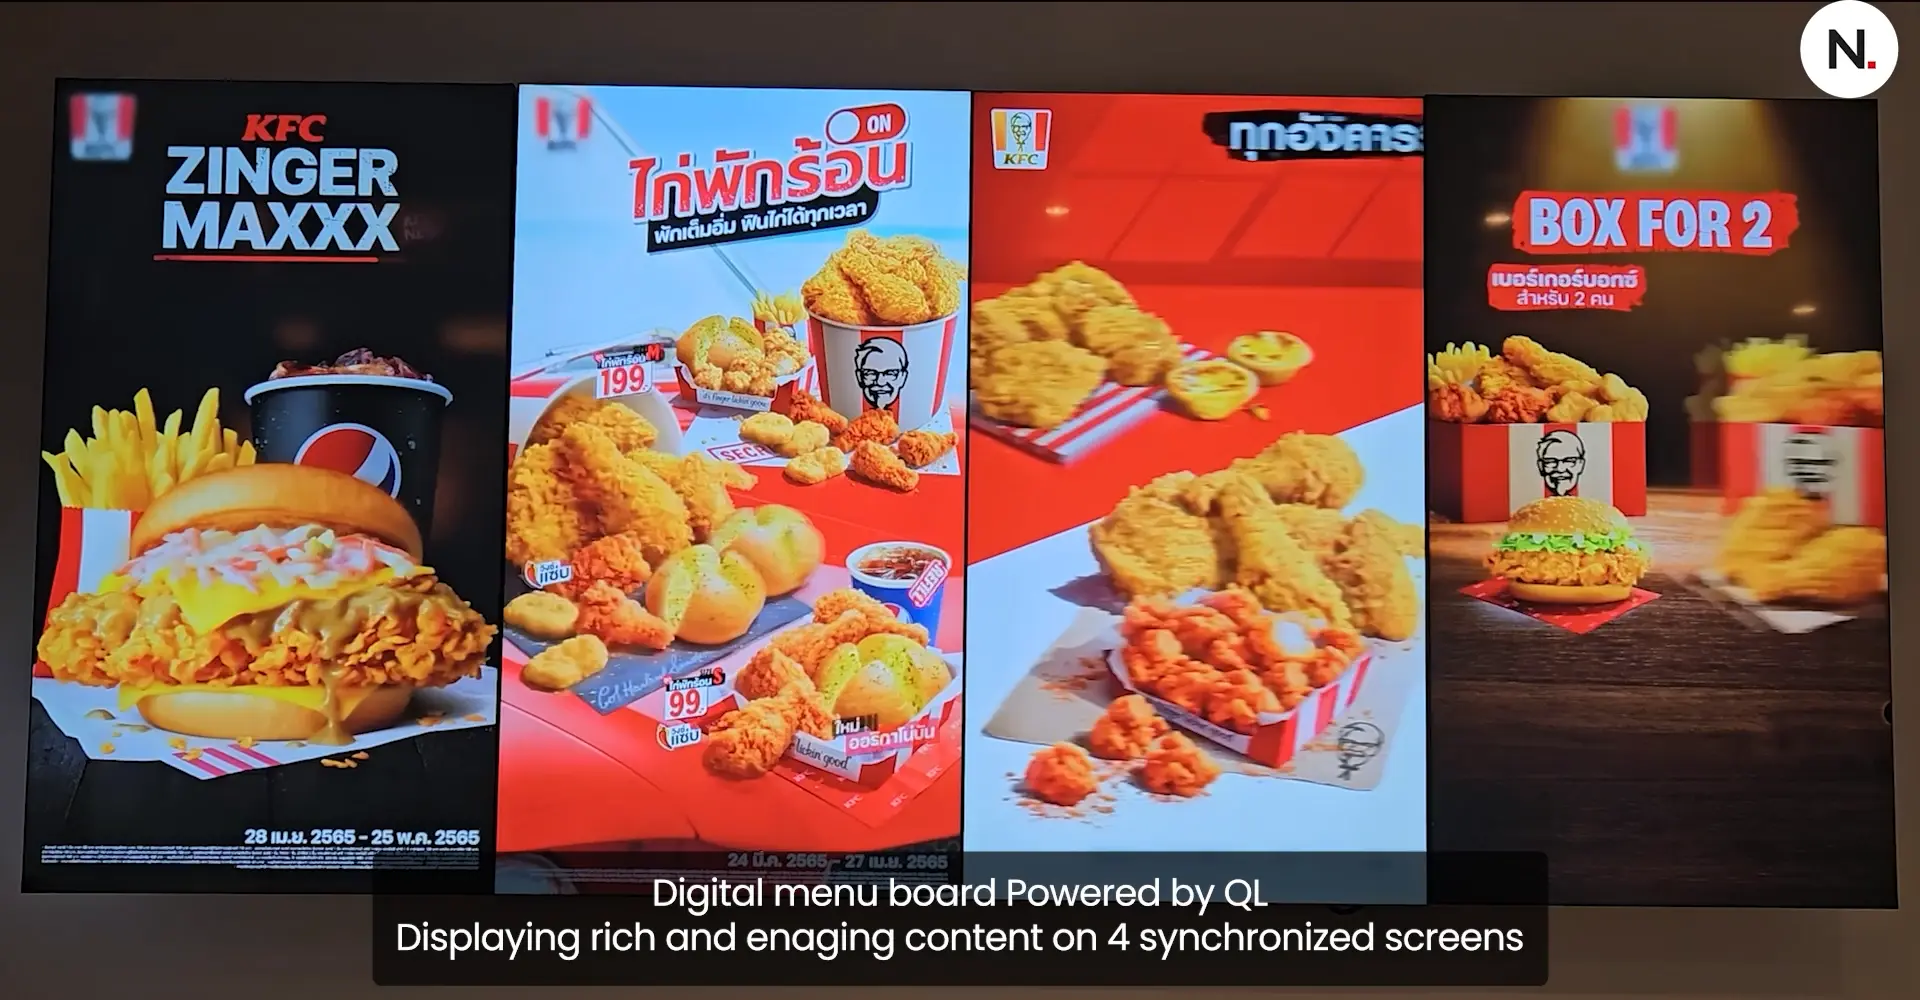 Deliver an Immersive Viewing Experience with Multi-screen Content Synchronization